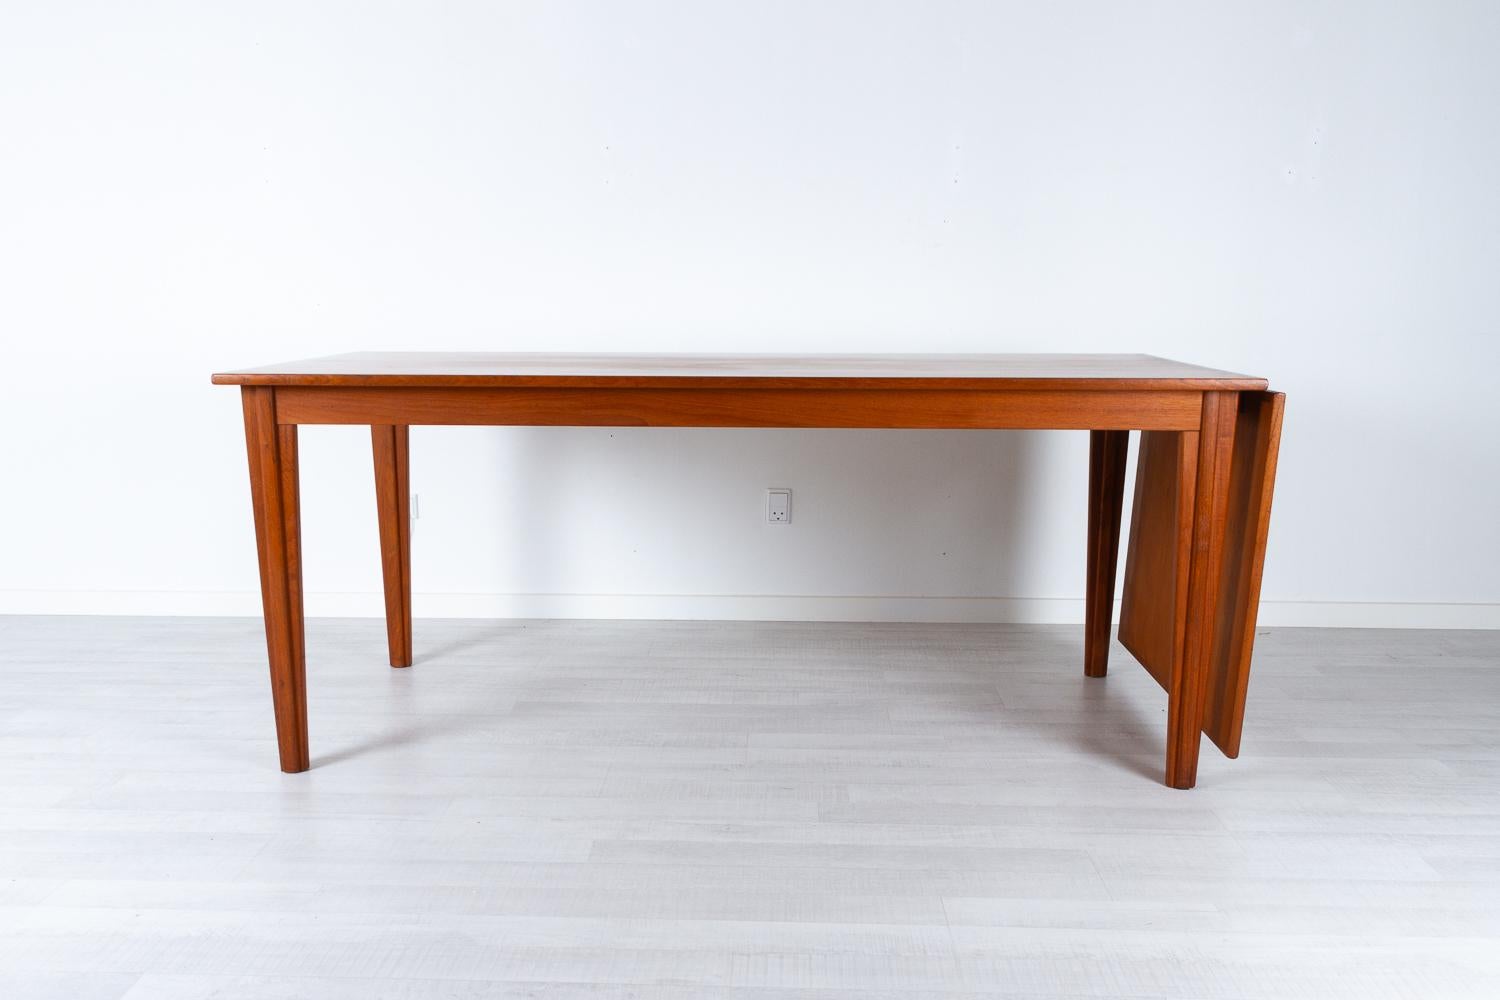 Danish modern teak drop leaf dining table, 1960s
Large dining table with drop leaf extension. Extension leaf can hang on one end or be stored under the table top. Table top slides very easily and can be operated by one person with ease. Tapered legs